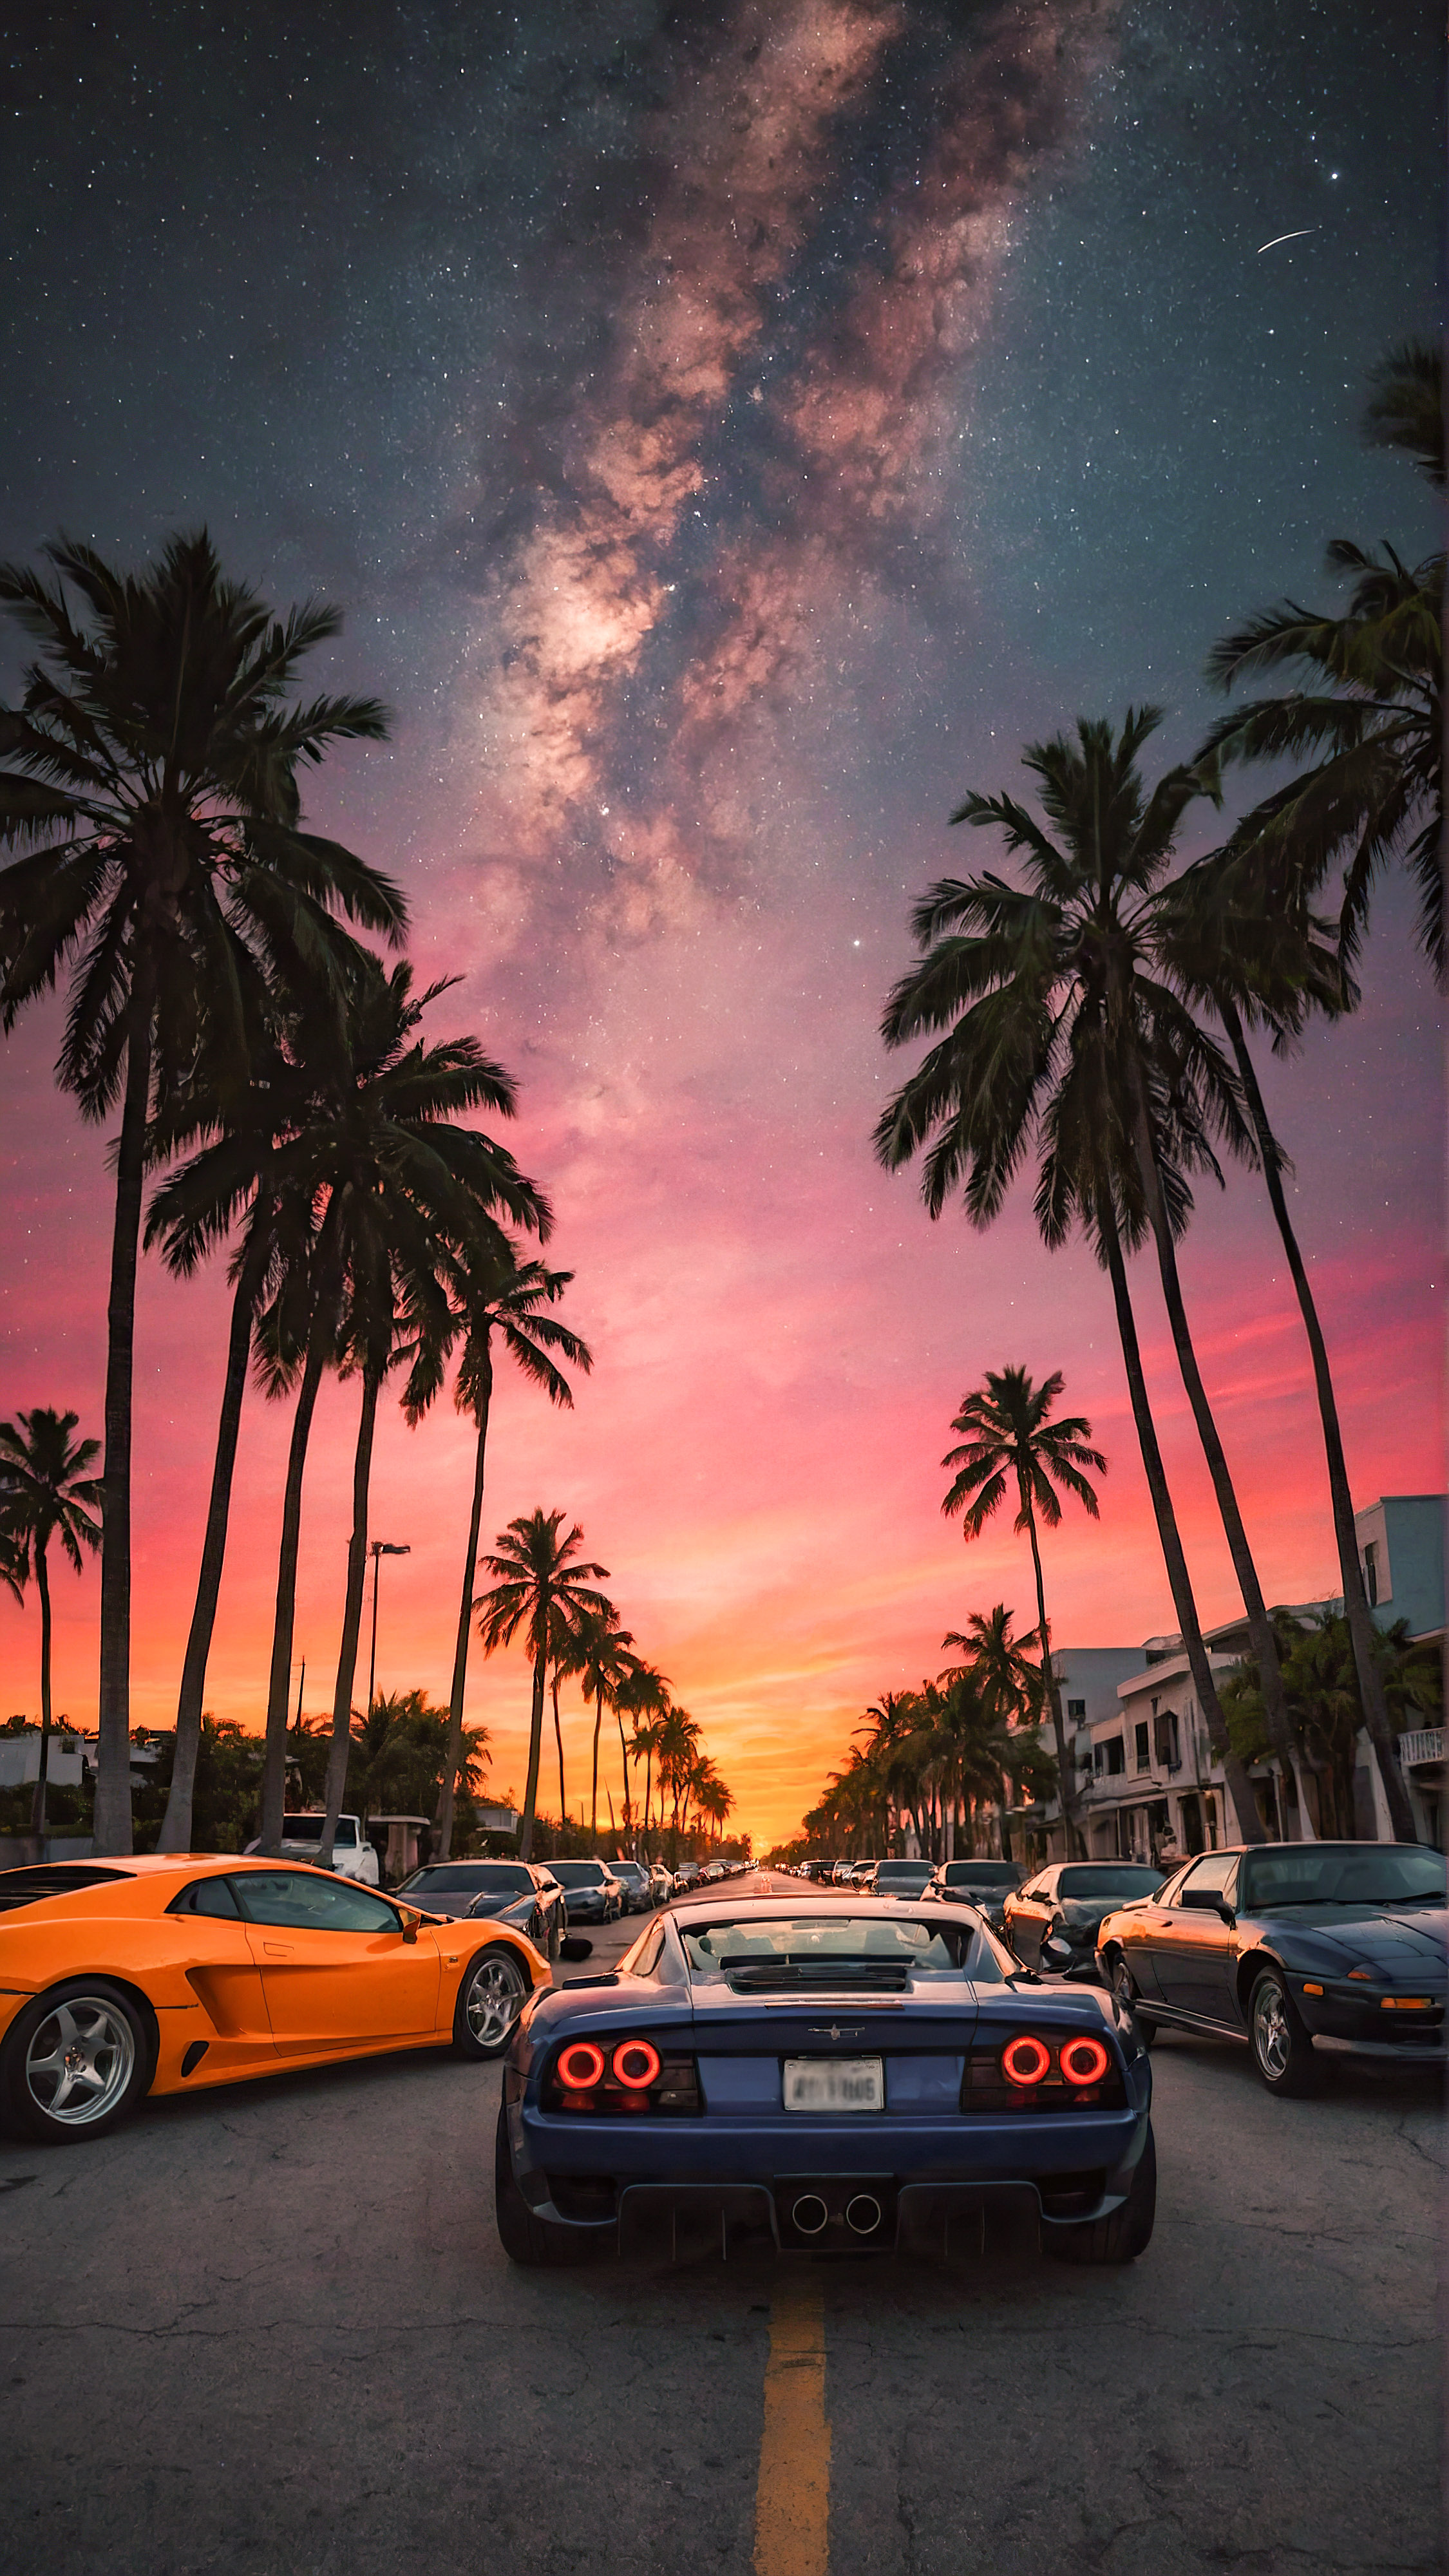 Experience the vibrancy of a cityscape at dusk with our car iPhone wallpaper, featuring a vibrant sunset on a street with sports cars lined with palm trees, under a starry sky with a crescent moon, adding a touch of urban charm to your device.